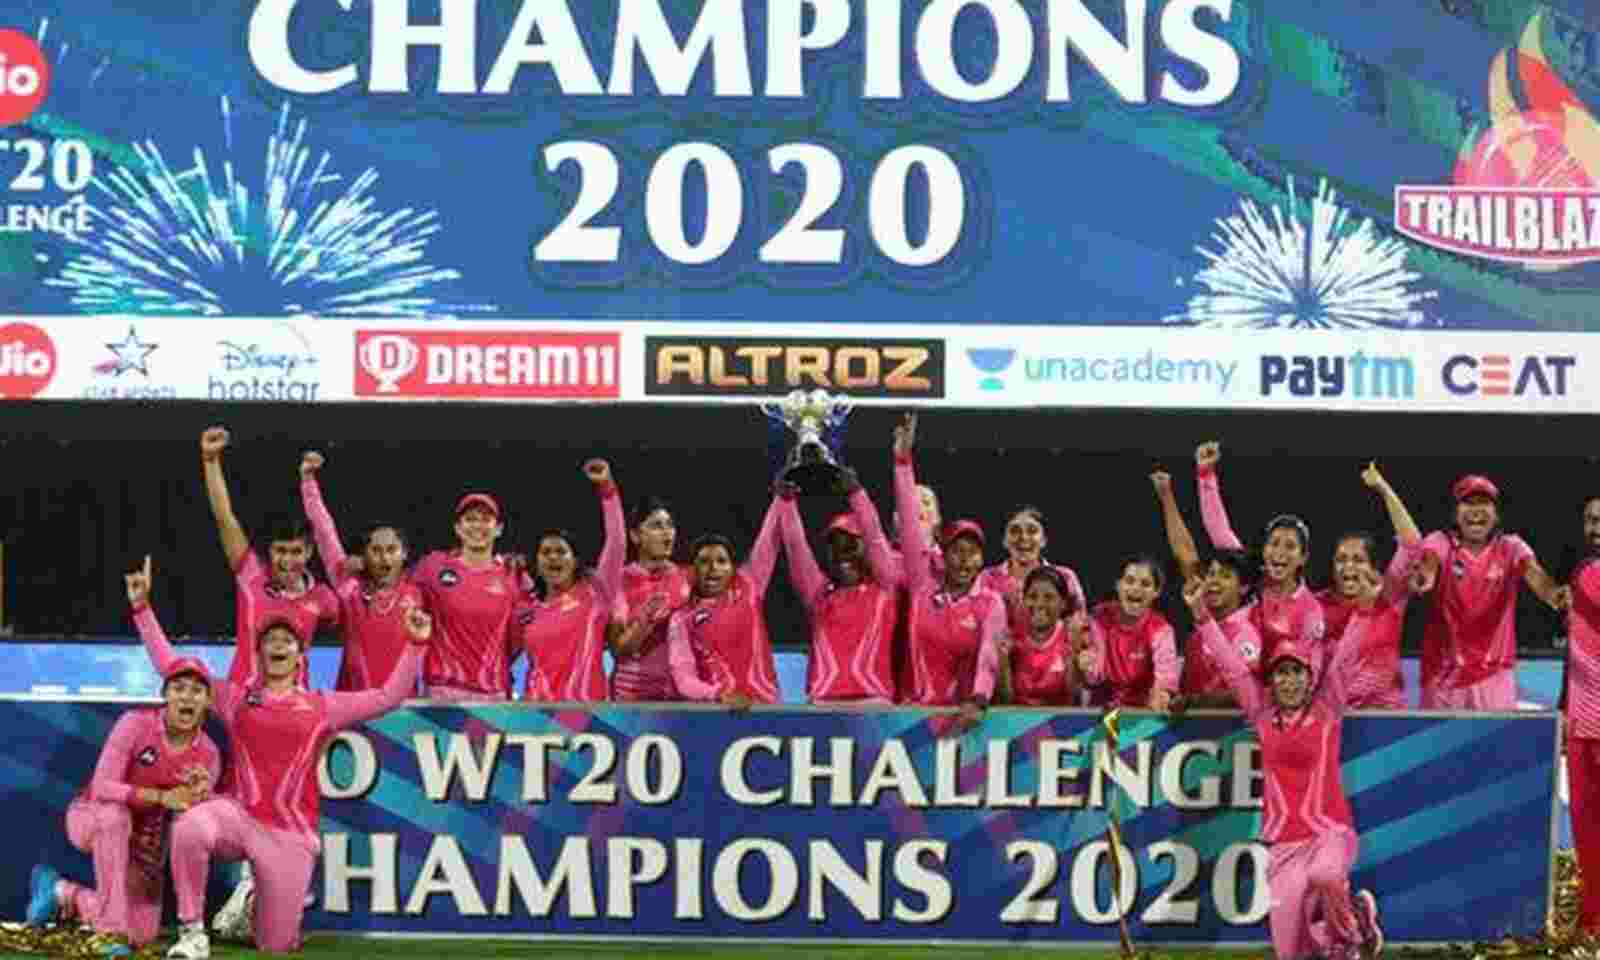 Women IPL Media Rights: BCCI to auction WIPL Media Rights in January, Jay Shah says ' Already received massive interest'